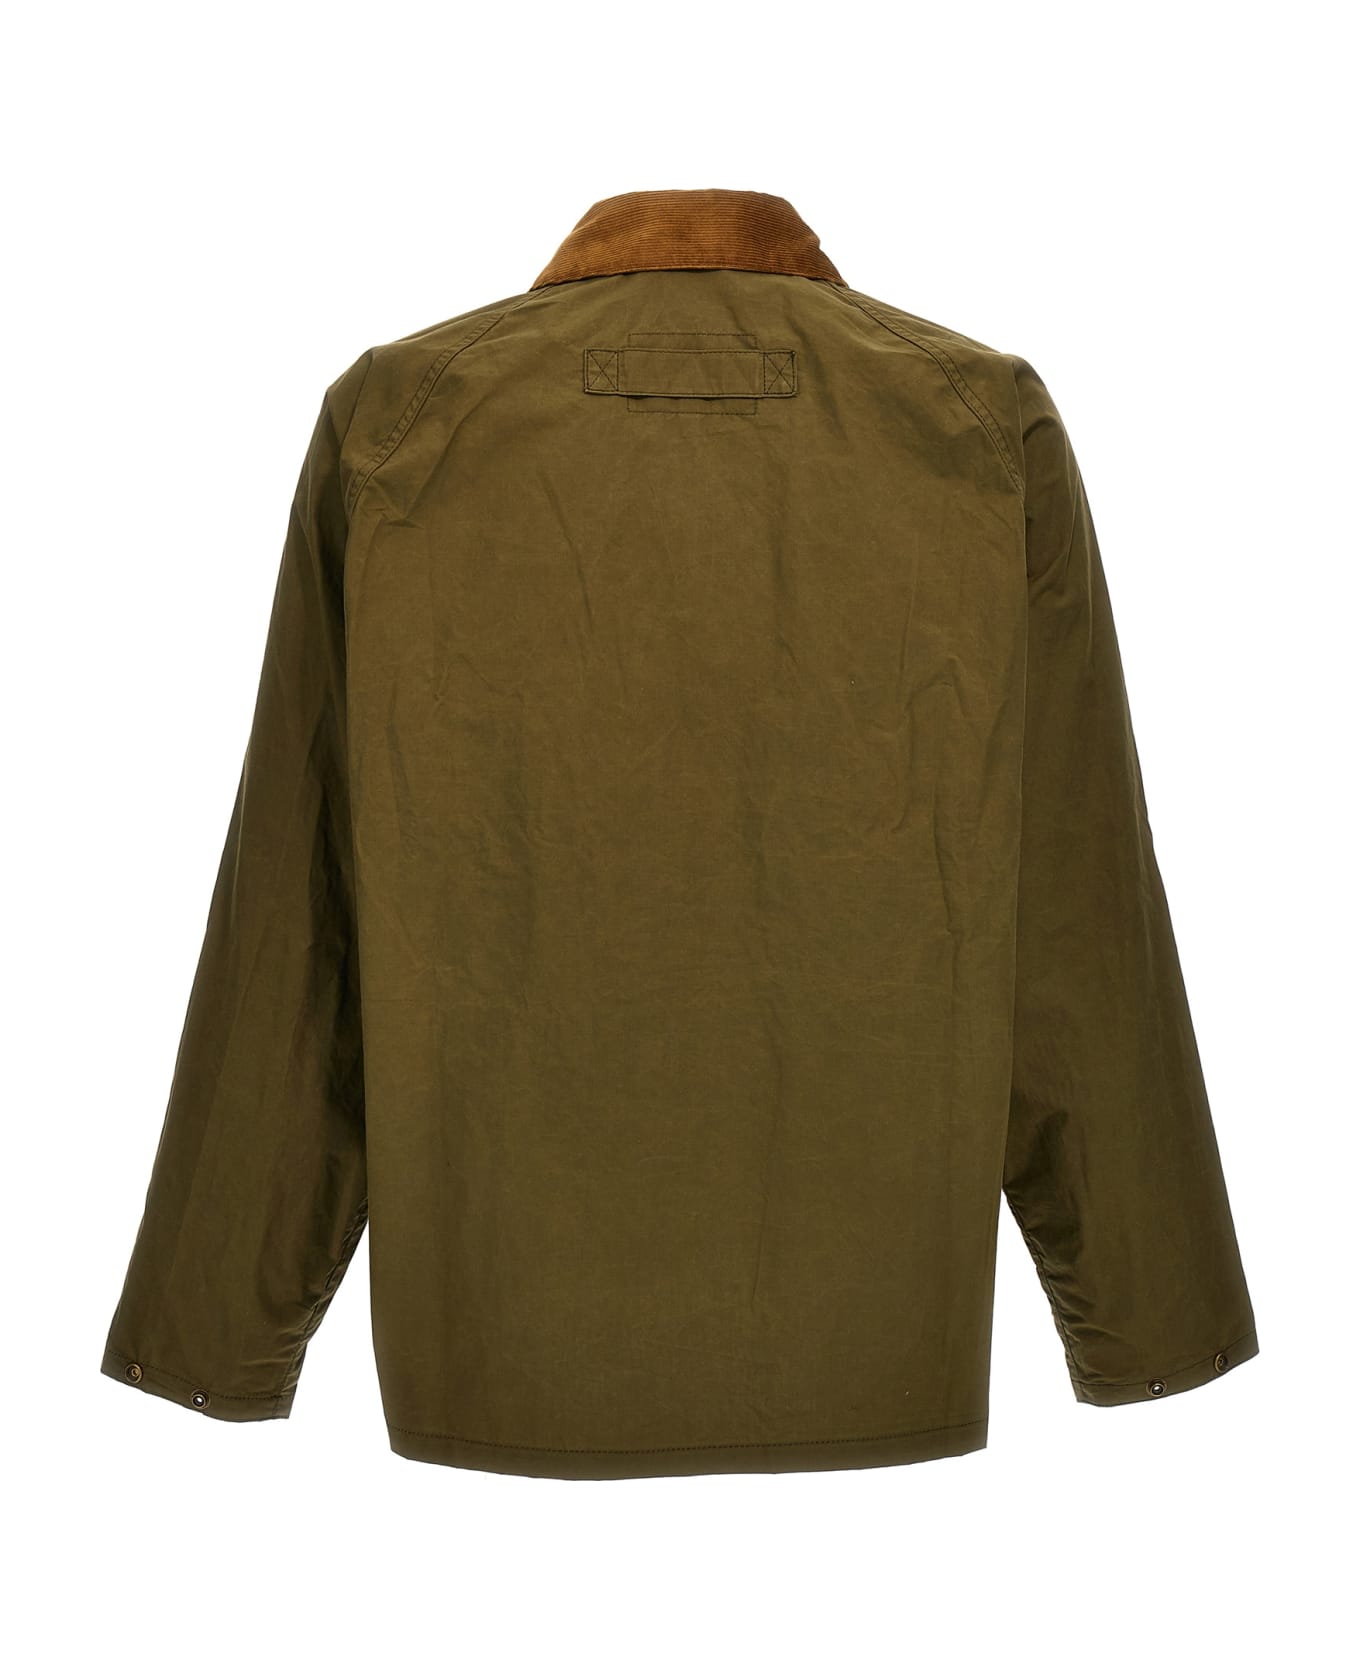 Barbour 'modified Transport' Jacket - Green